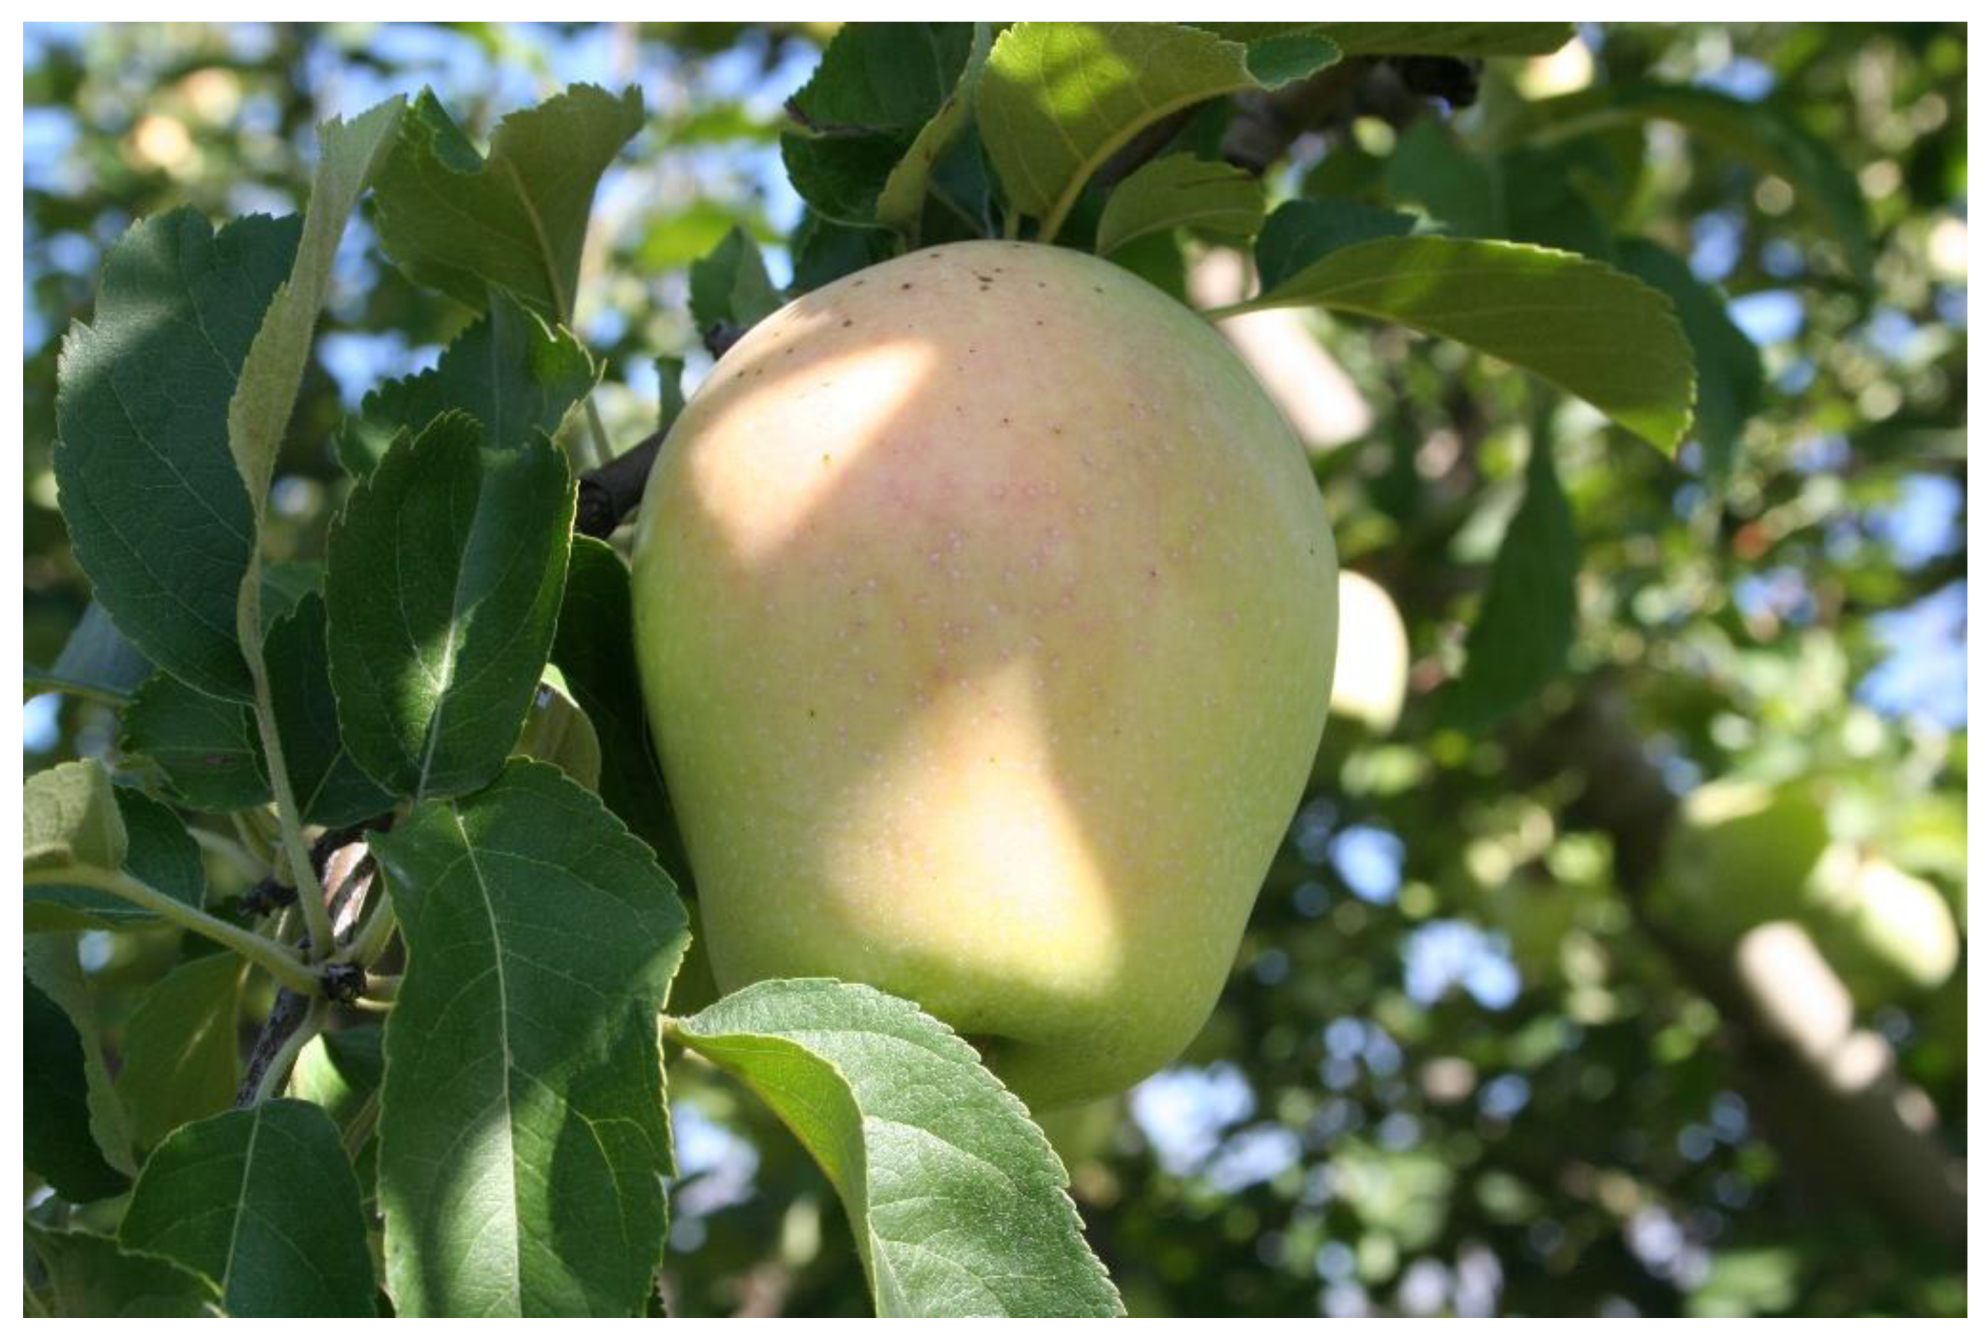 Agronomy Free Full Text Molecular Physico Chemical And Sensory Characterization Of The Traditional Spanish Apple Variety Pero De Cehegin Html